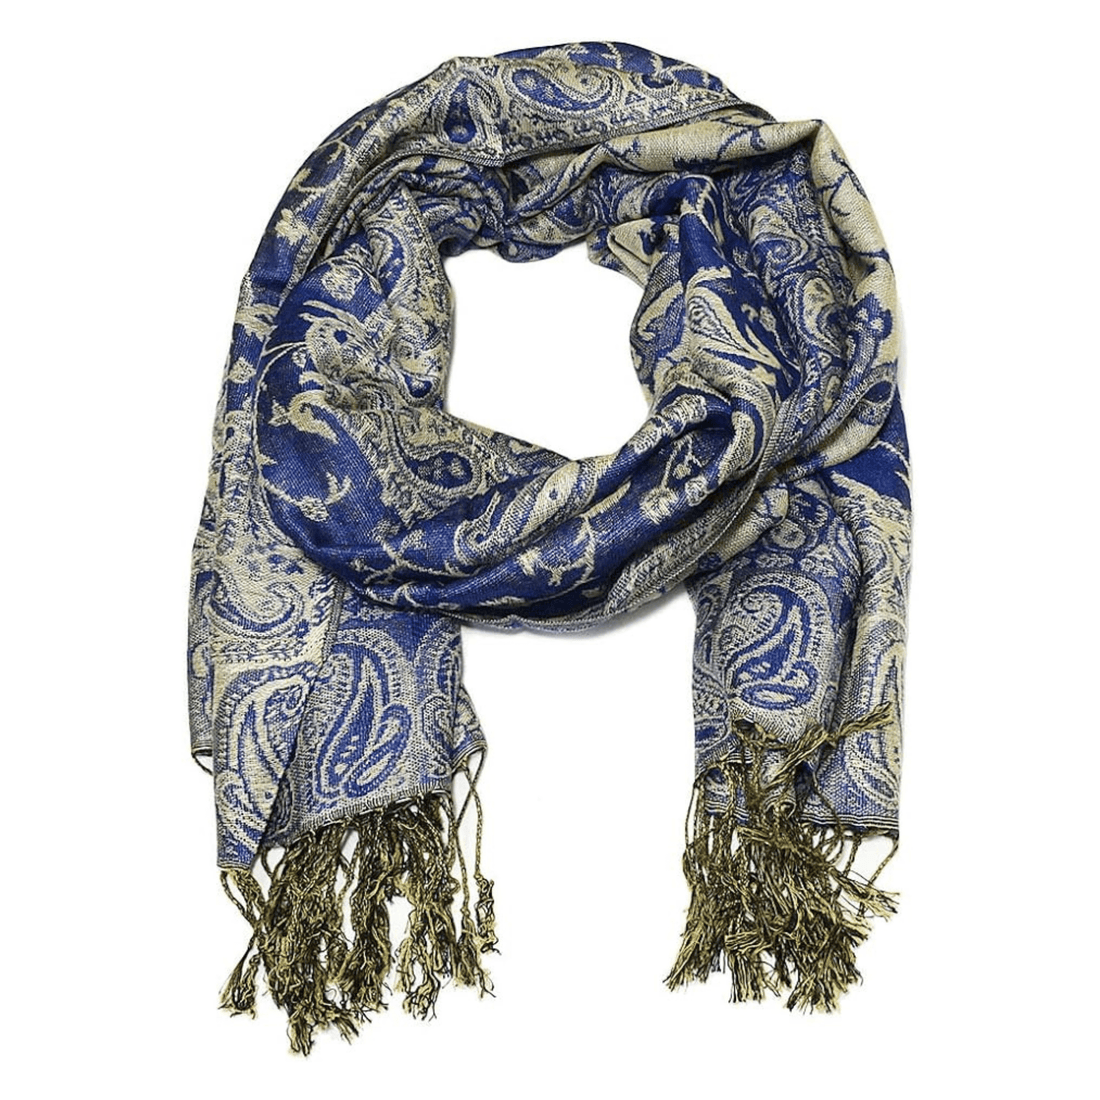 Rave Essentials Co. 3-5 Day Expedited Shipping [USA ONLY] / Style 1 - Royal RE® Deluxe Paisley Pashmina